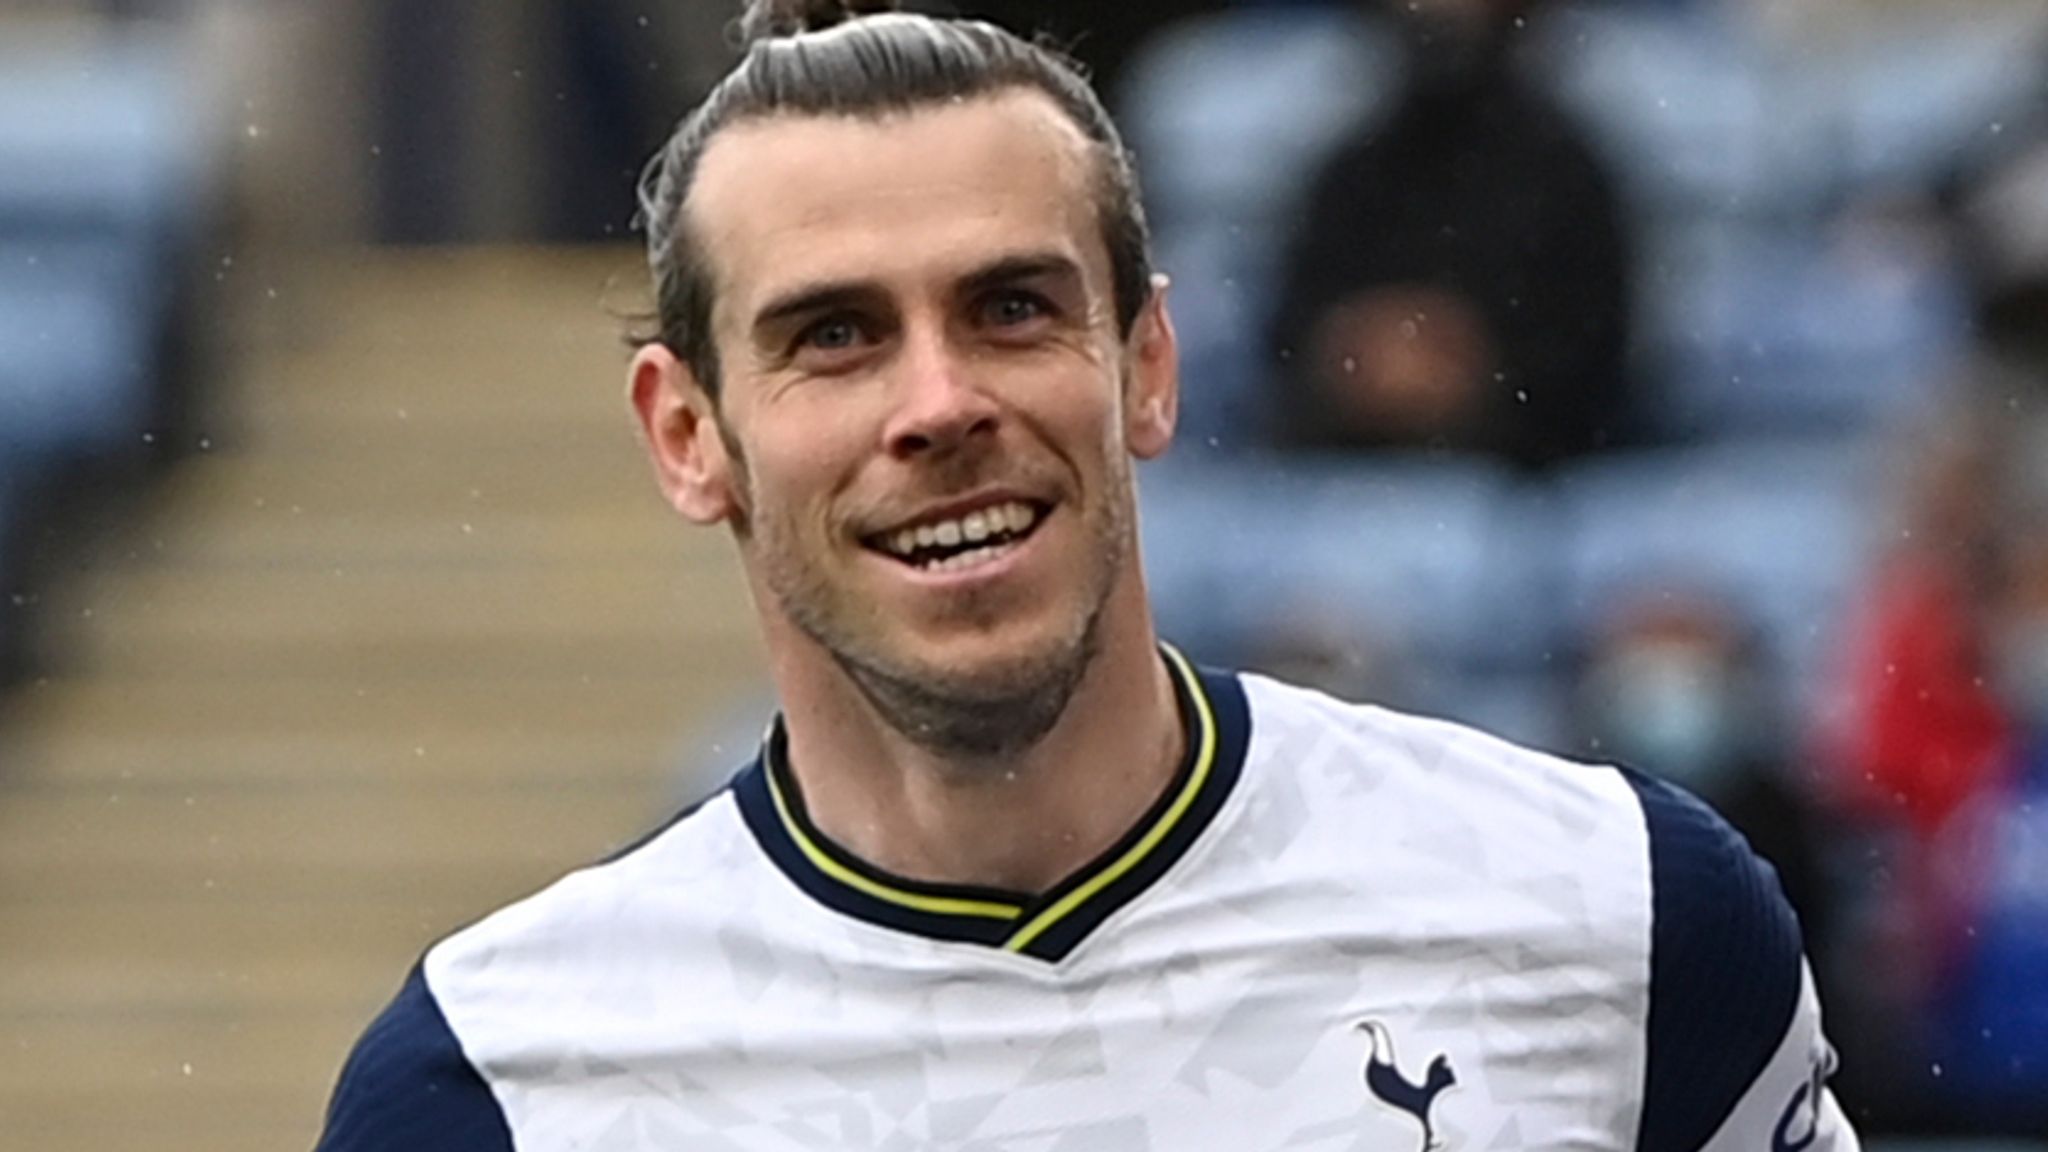 Gareth Bale Tottenham S On Loan Forward To Wait Until After Euros Before Revealing Future Plans Football News Sky Sports